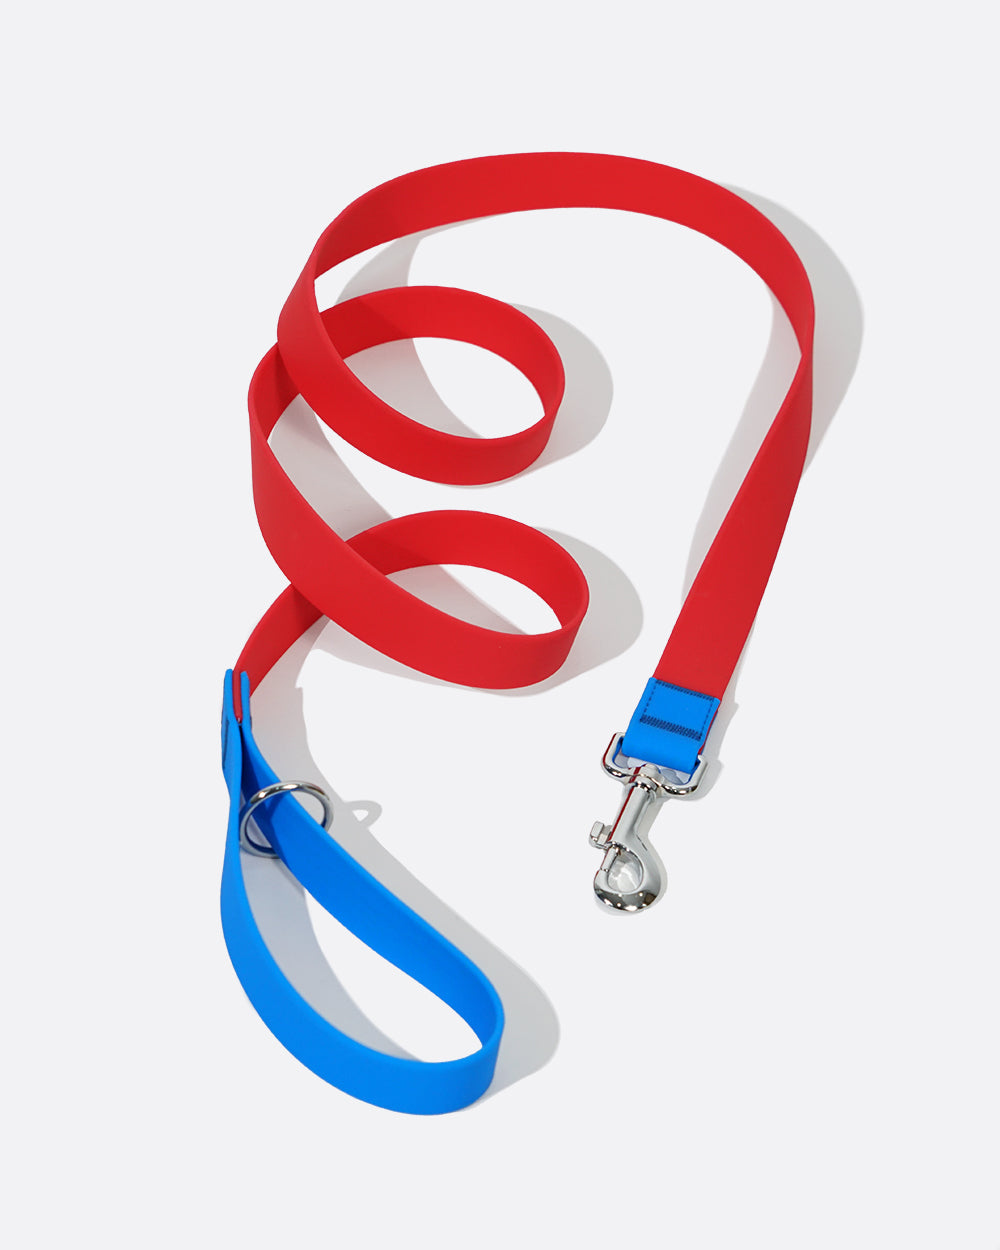 A durable and waterproof dog leash designed for outdoor adventures, with a 360° Rotating Metal Clasp, red with blue color match